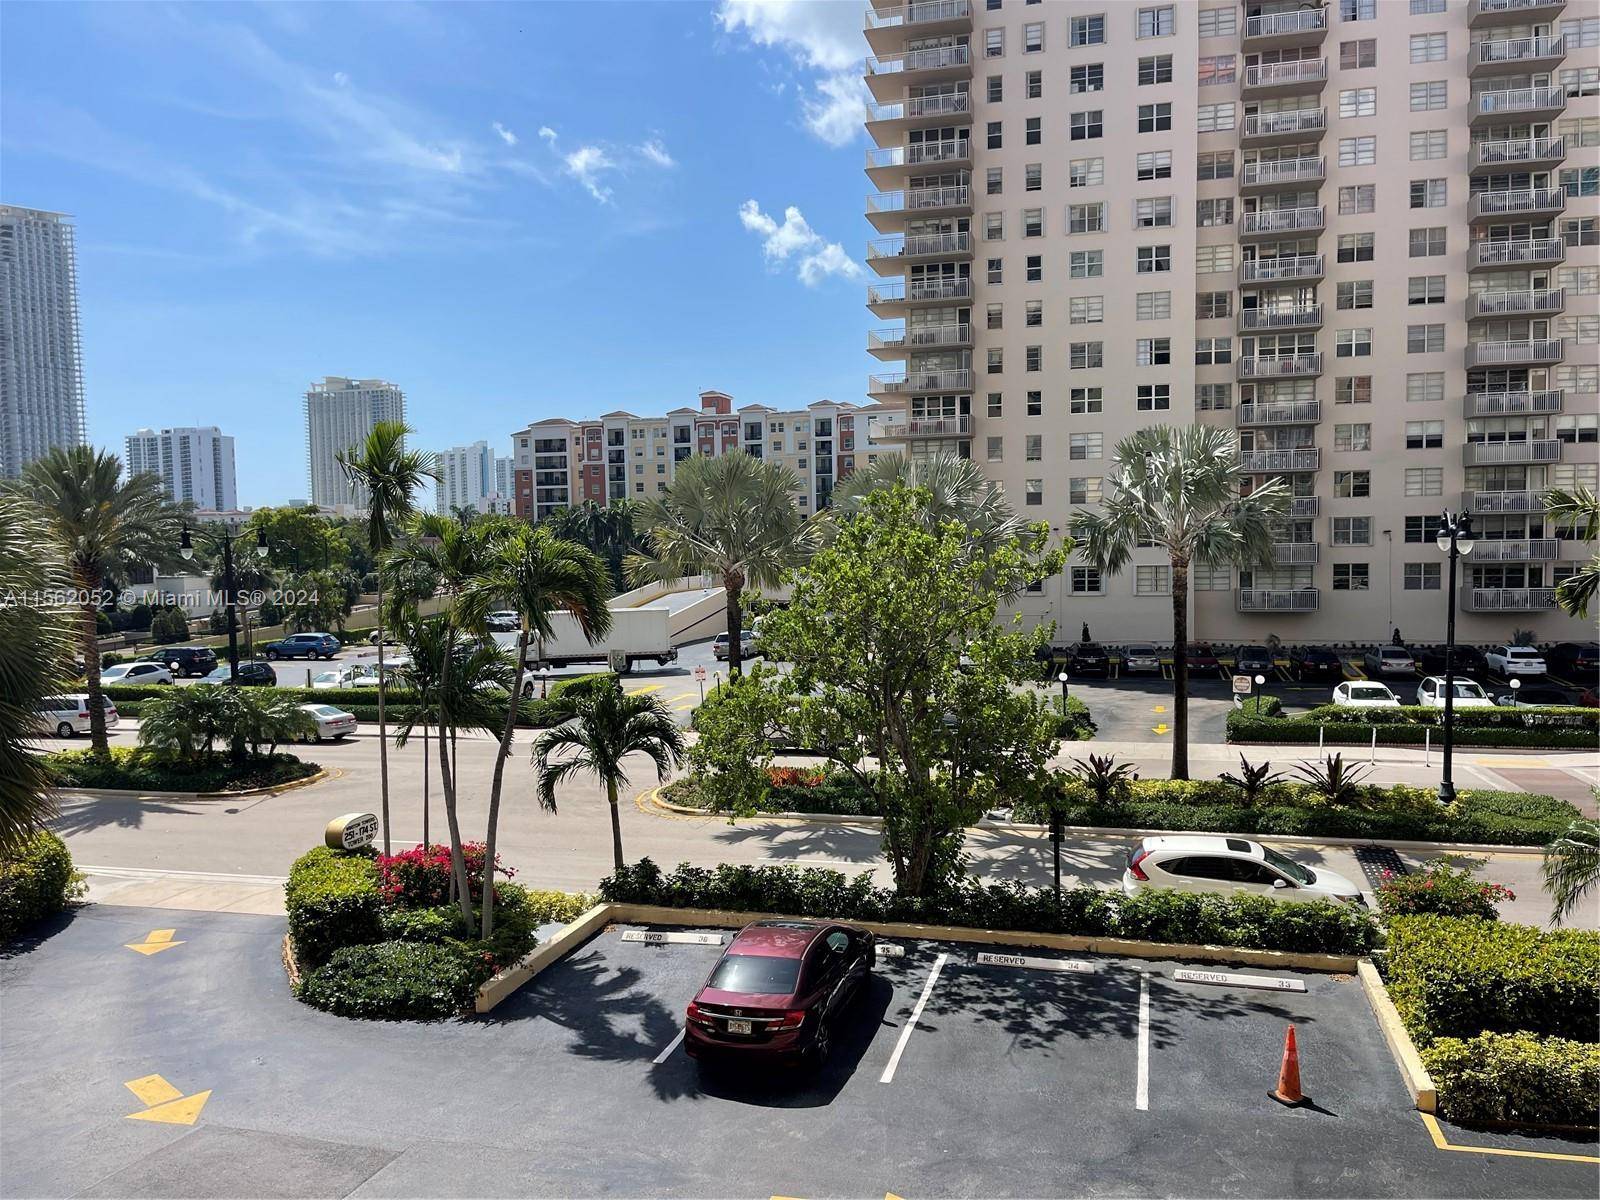 REDUCED PRICE ! ! ! VERY WELL MANAGED MAINTAINED THE WINSTON TOWER 200 BUILDING, SITUATED IN SUNNY ISLES BEACH ; FLORIDA'S RIVIERA !